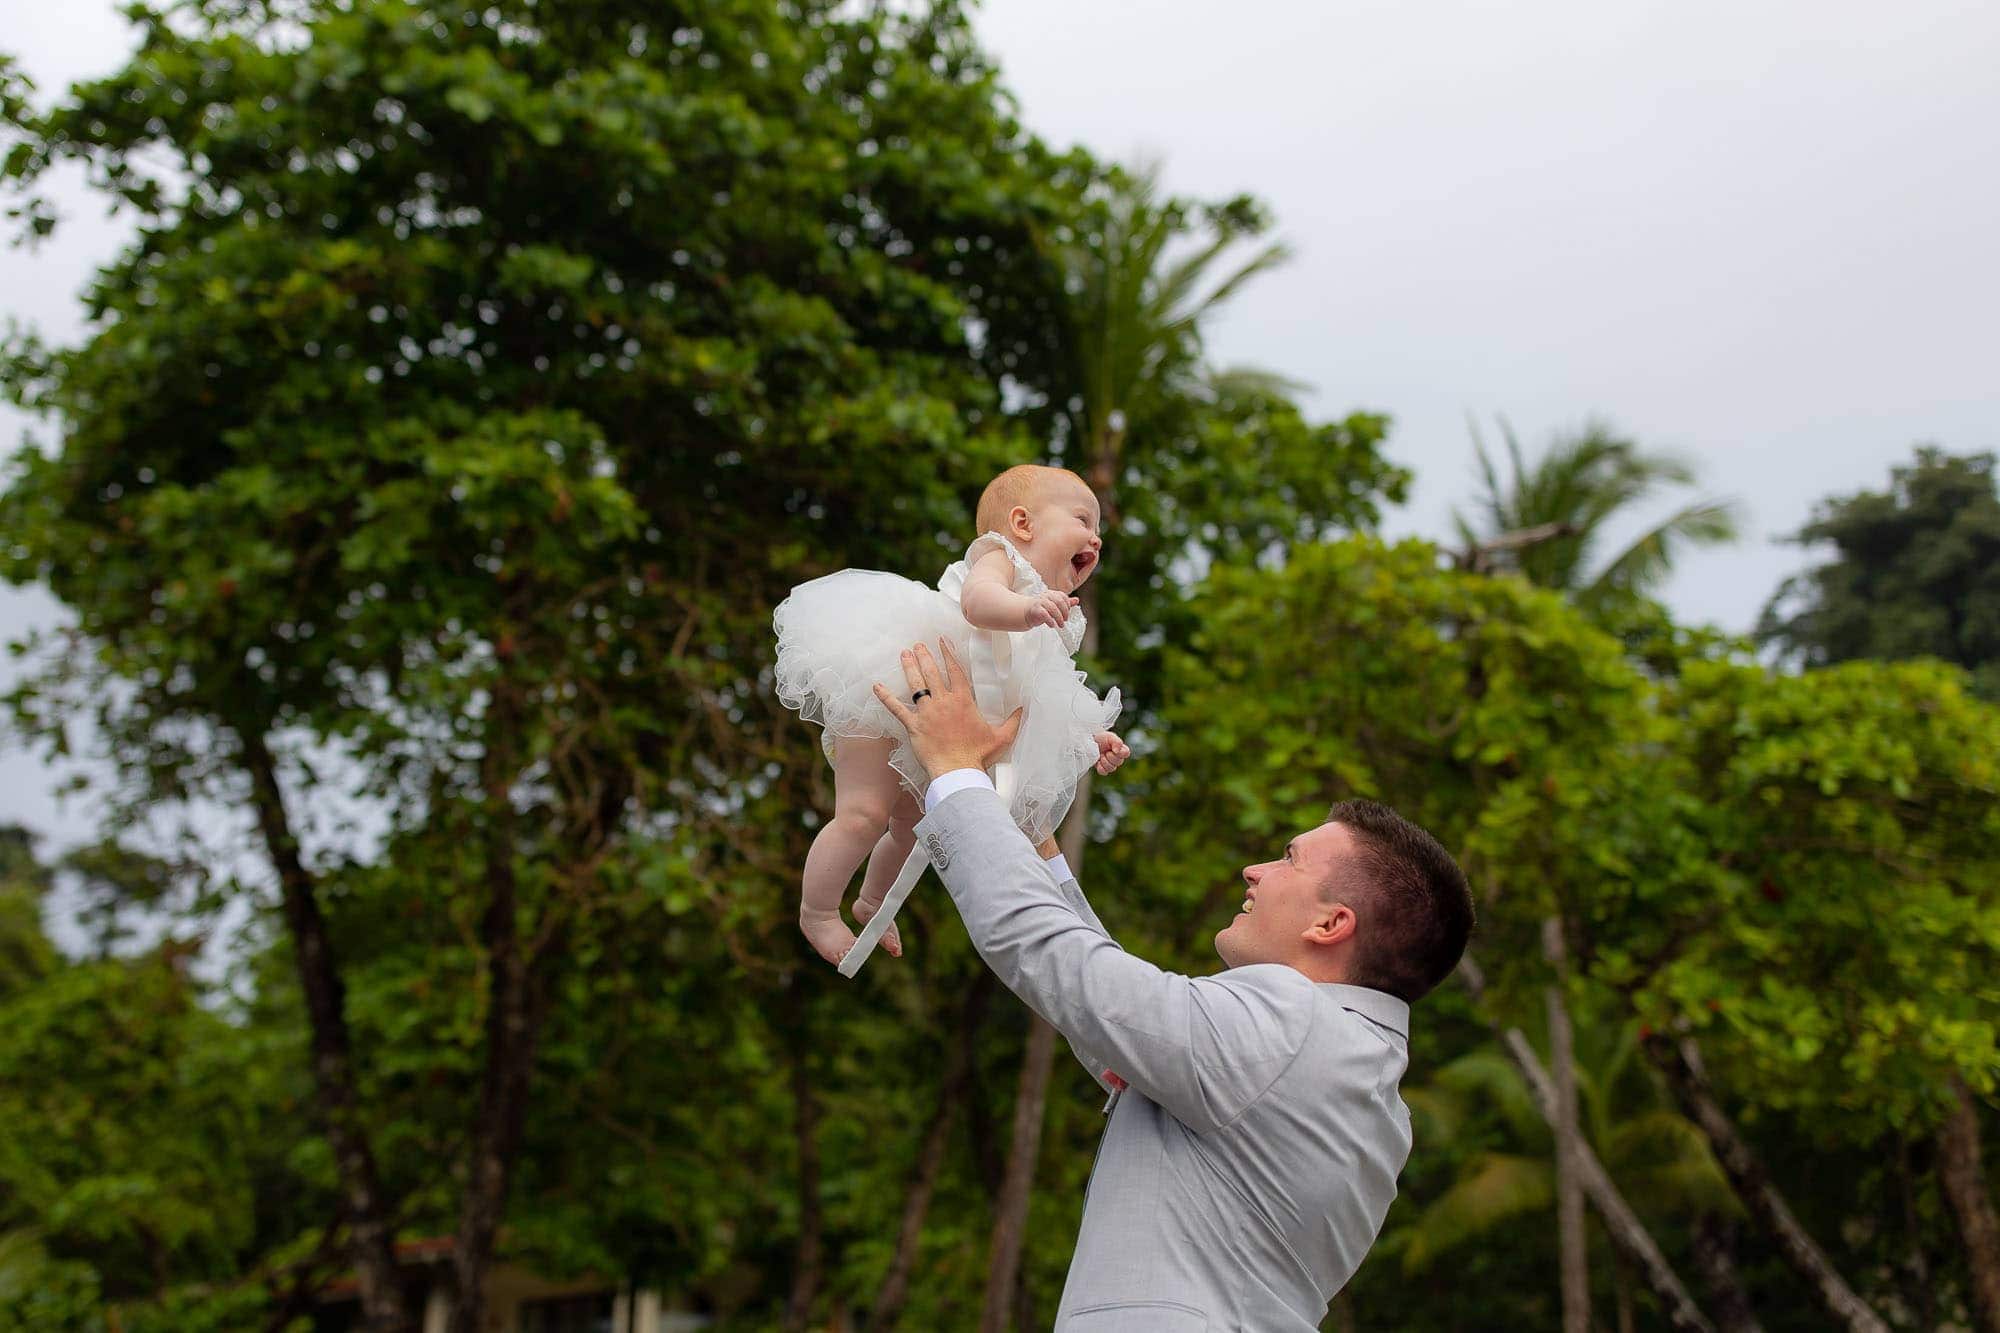 Groom tosses delighted baby in the air